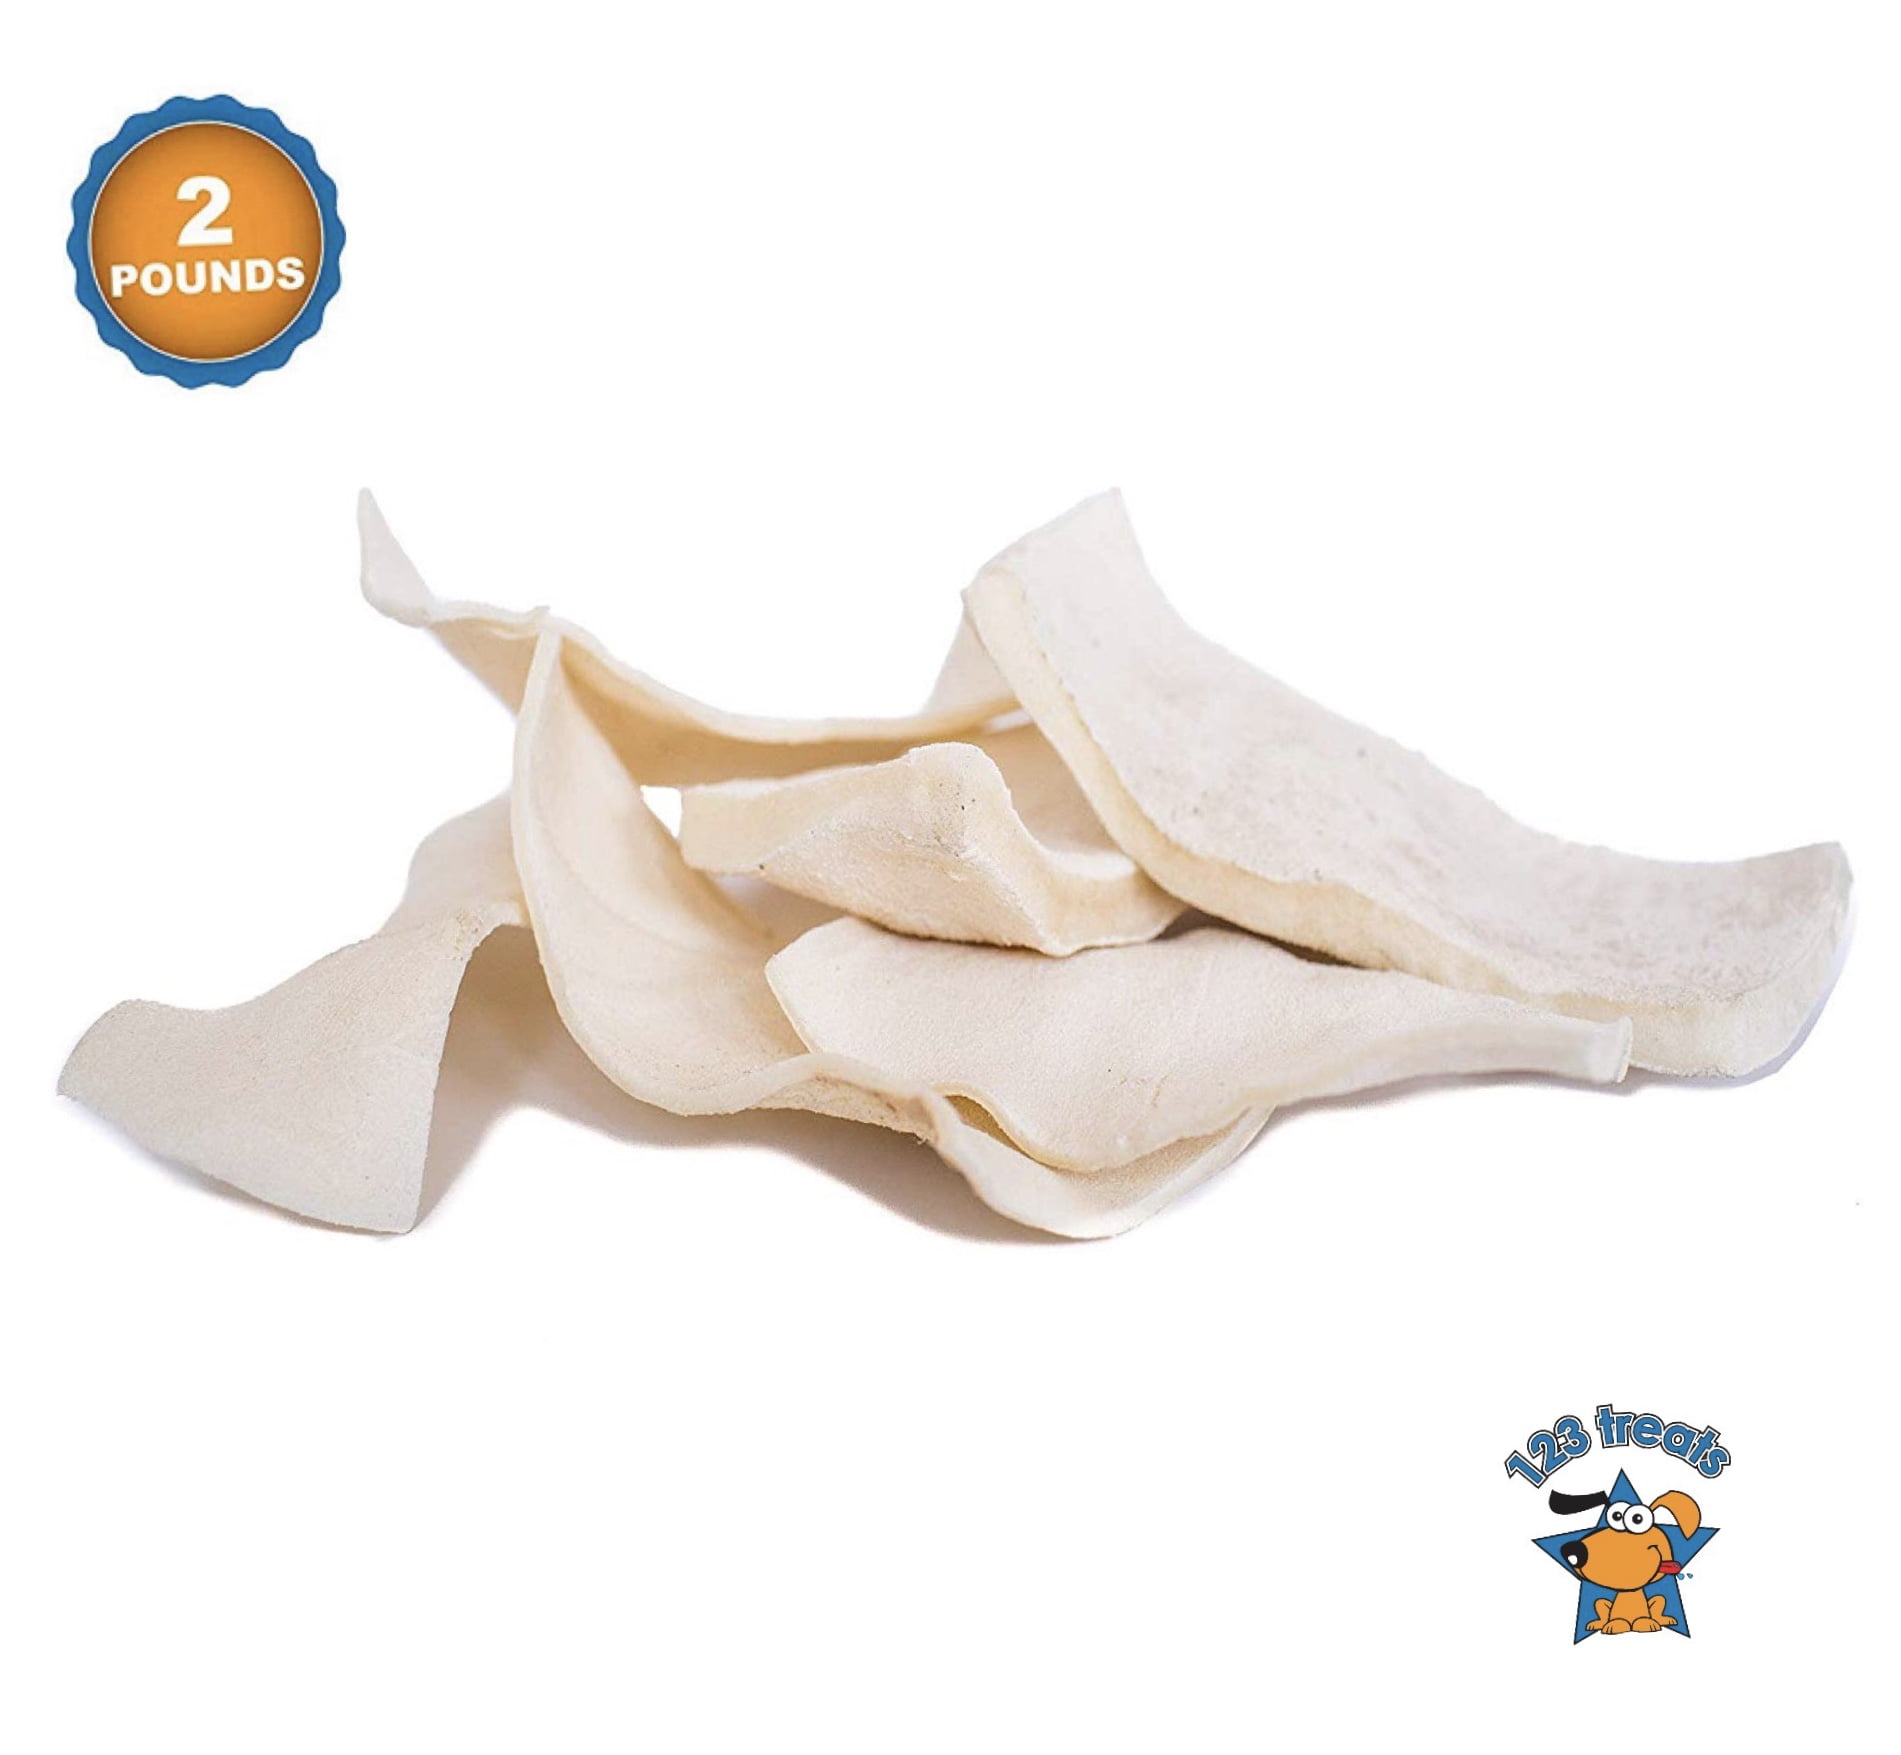 Rawhide Chips Dog Treats Free-Form for Dogs No Additives 123 Treats Chemicals or Hormones from Natural Grass Fed Livestock Quality Bulk Beef Hide Dog Chews 